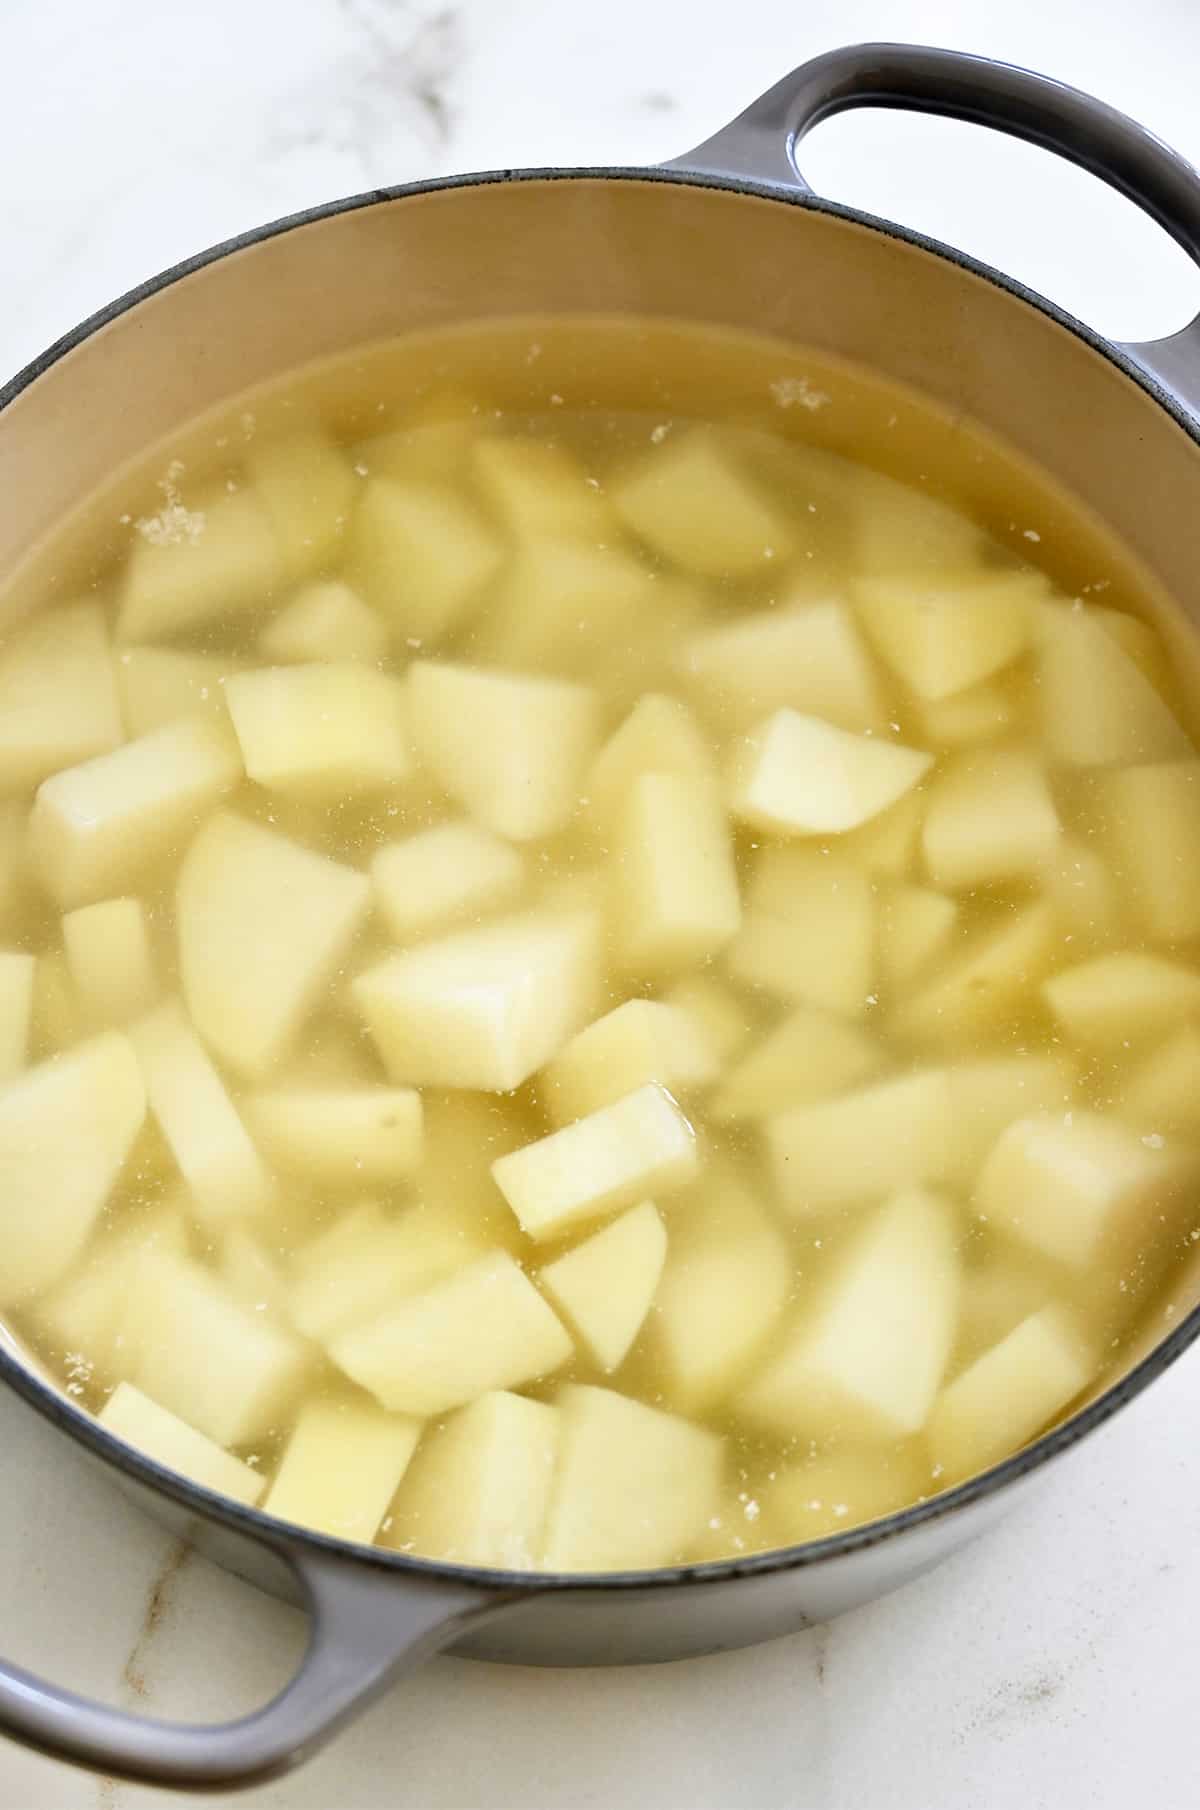 Boiling potatoes in a large stockpot.